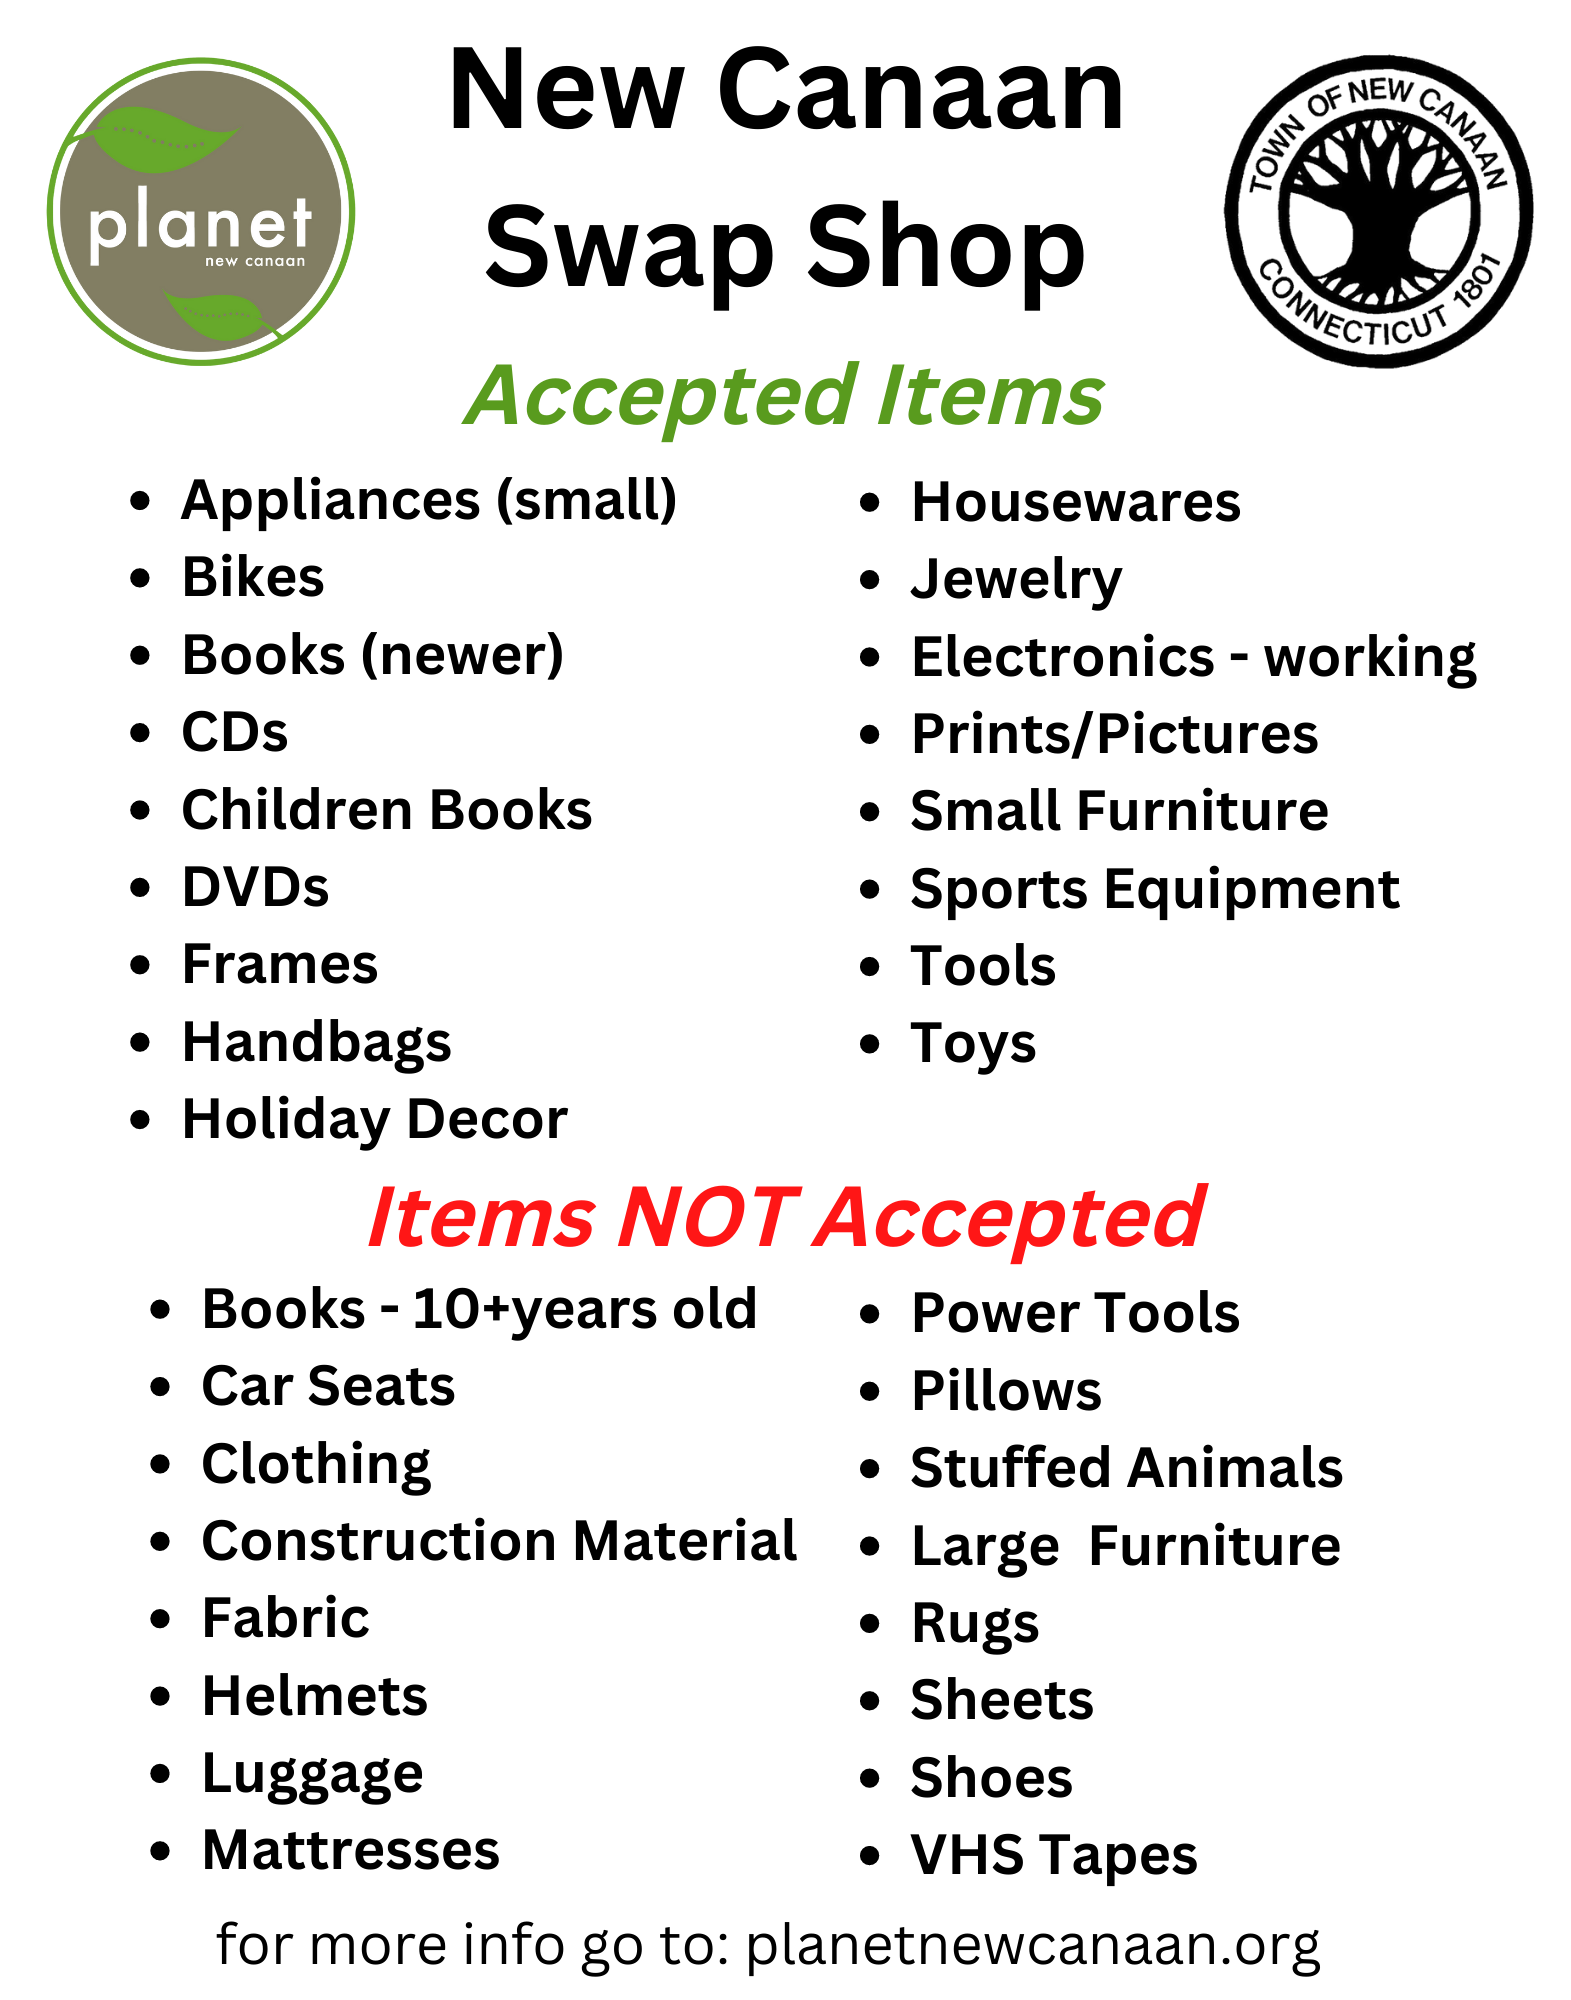 What the New Canaan Swap Shop accepts to help reduce waste